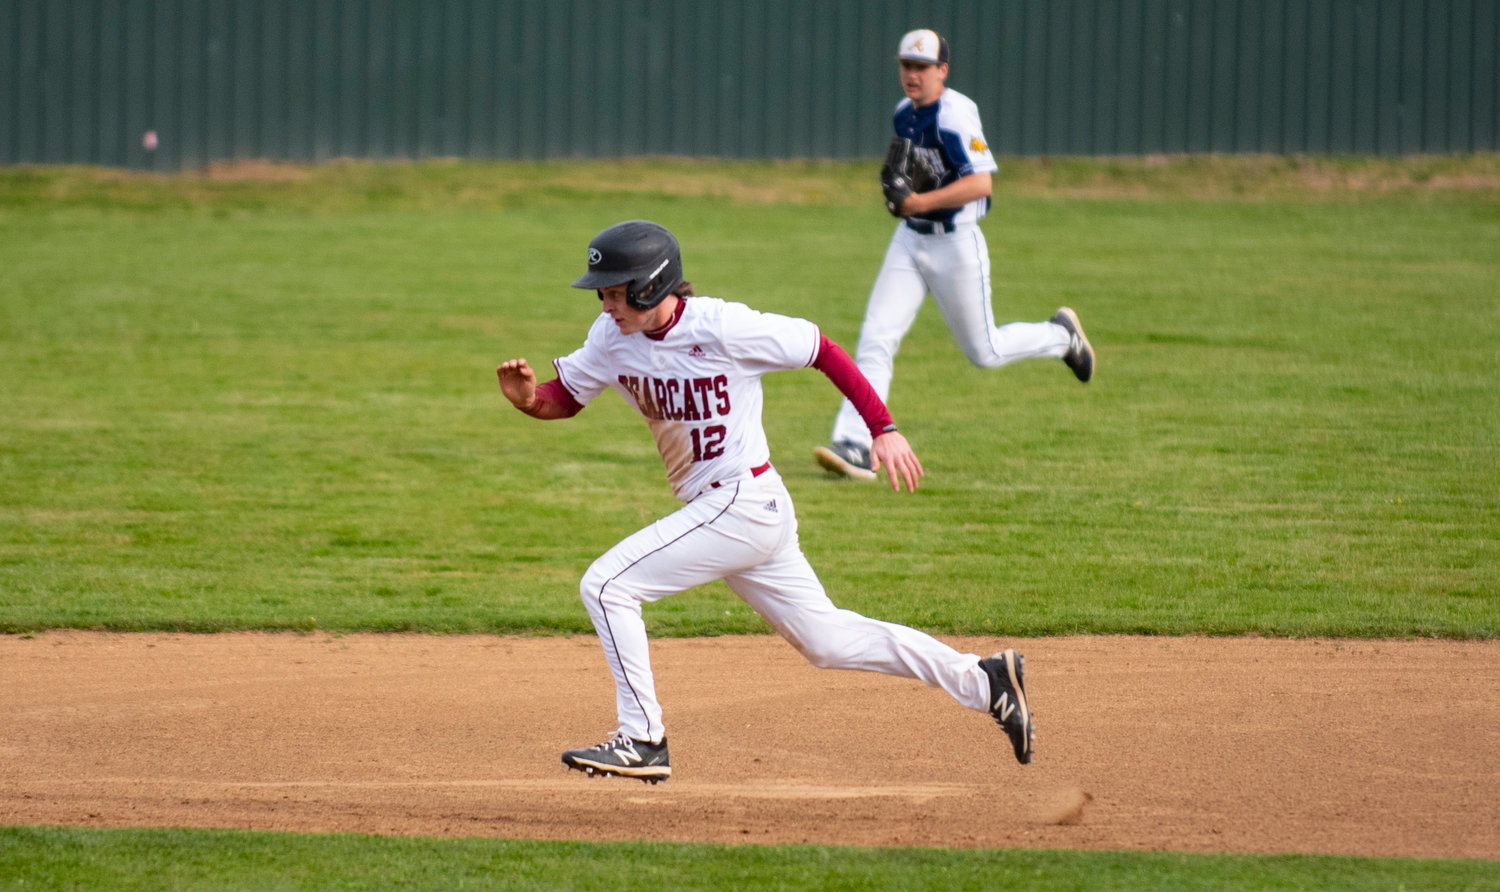 W.F. West pinch runner Jacob Douglass sprints to third base on Friday.